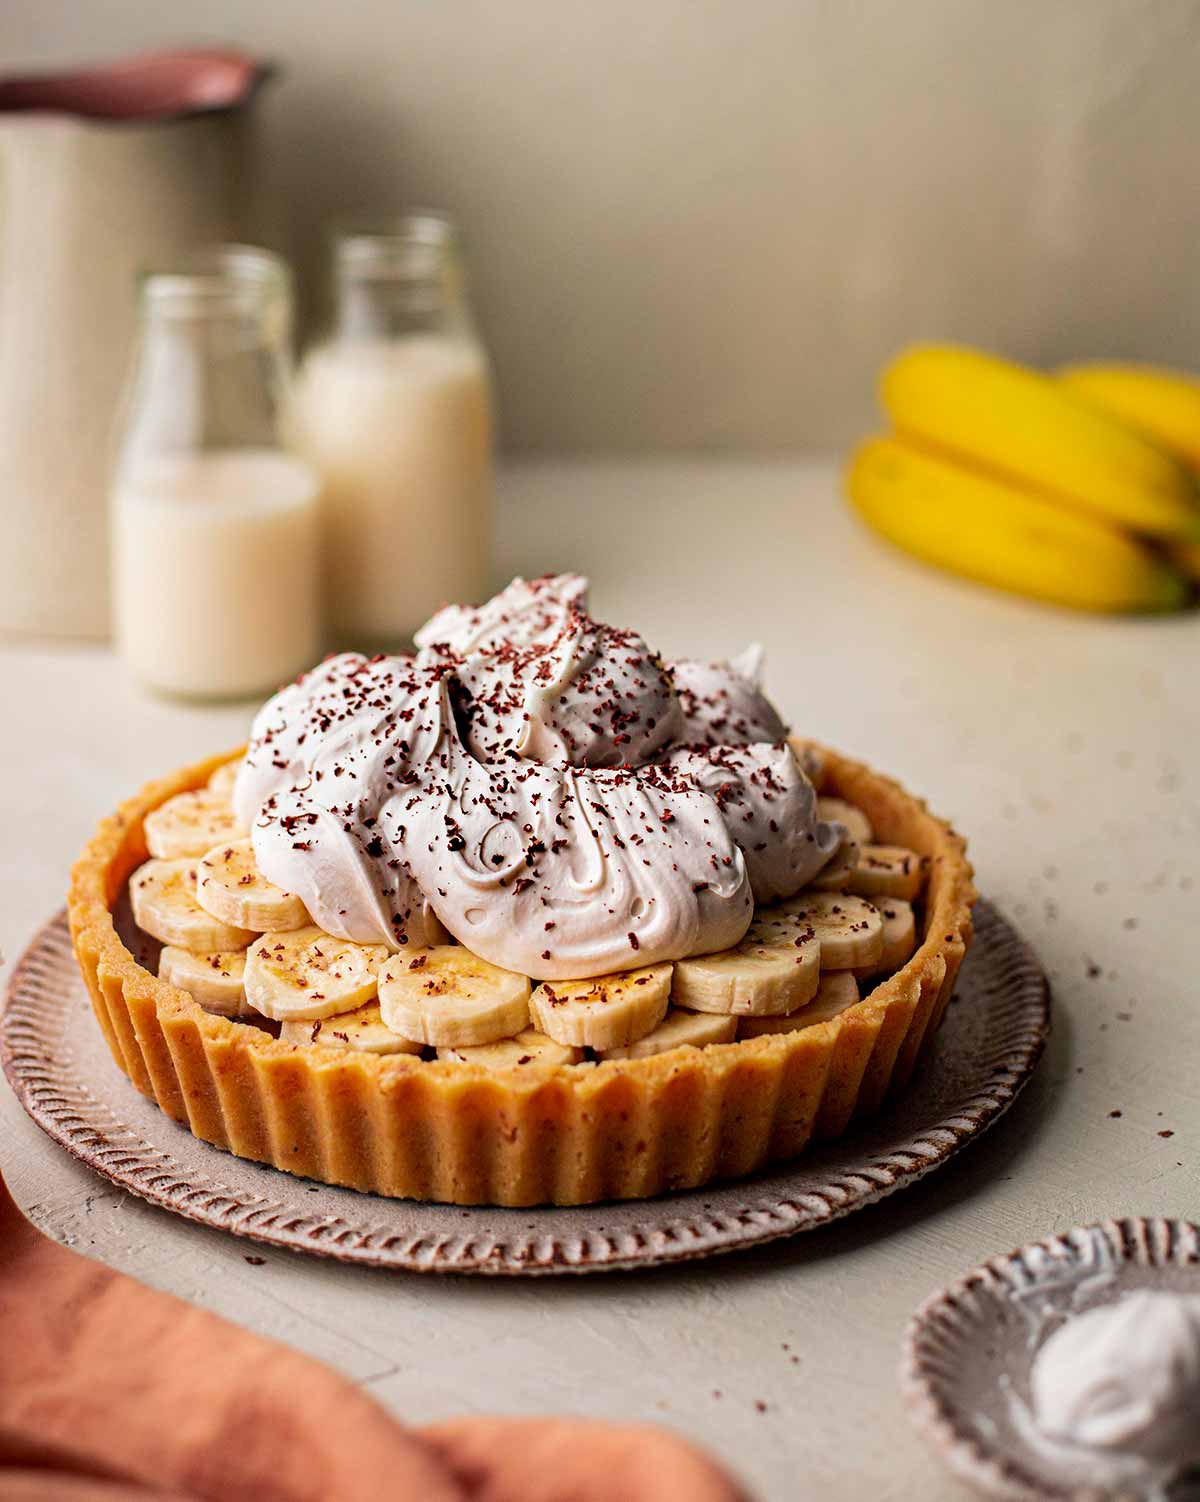 Photography of vegan banoffee pie with ingredients in foreground and background.